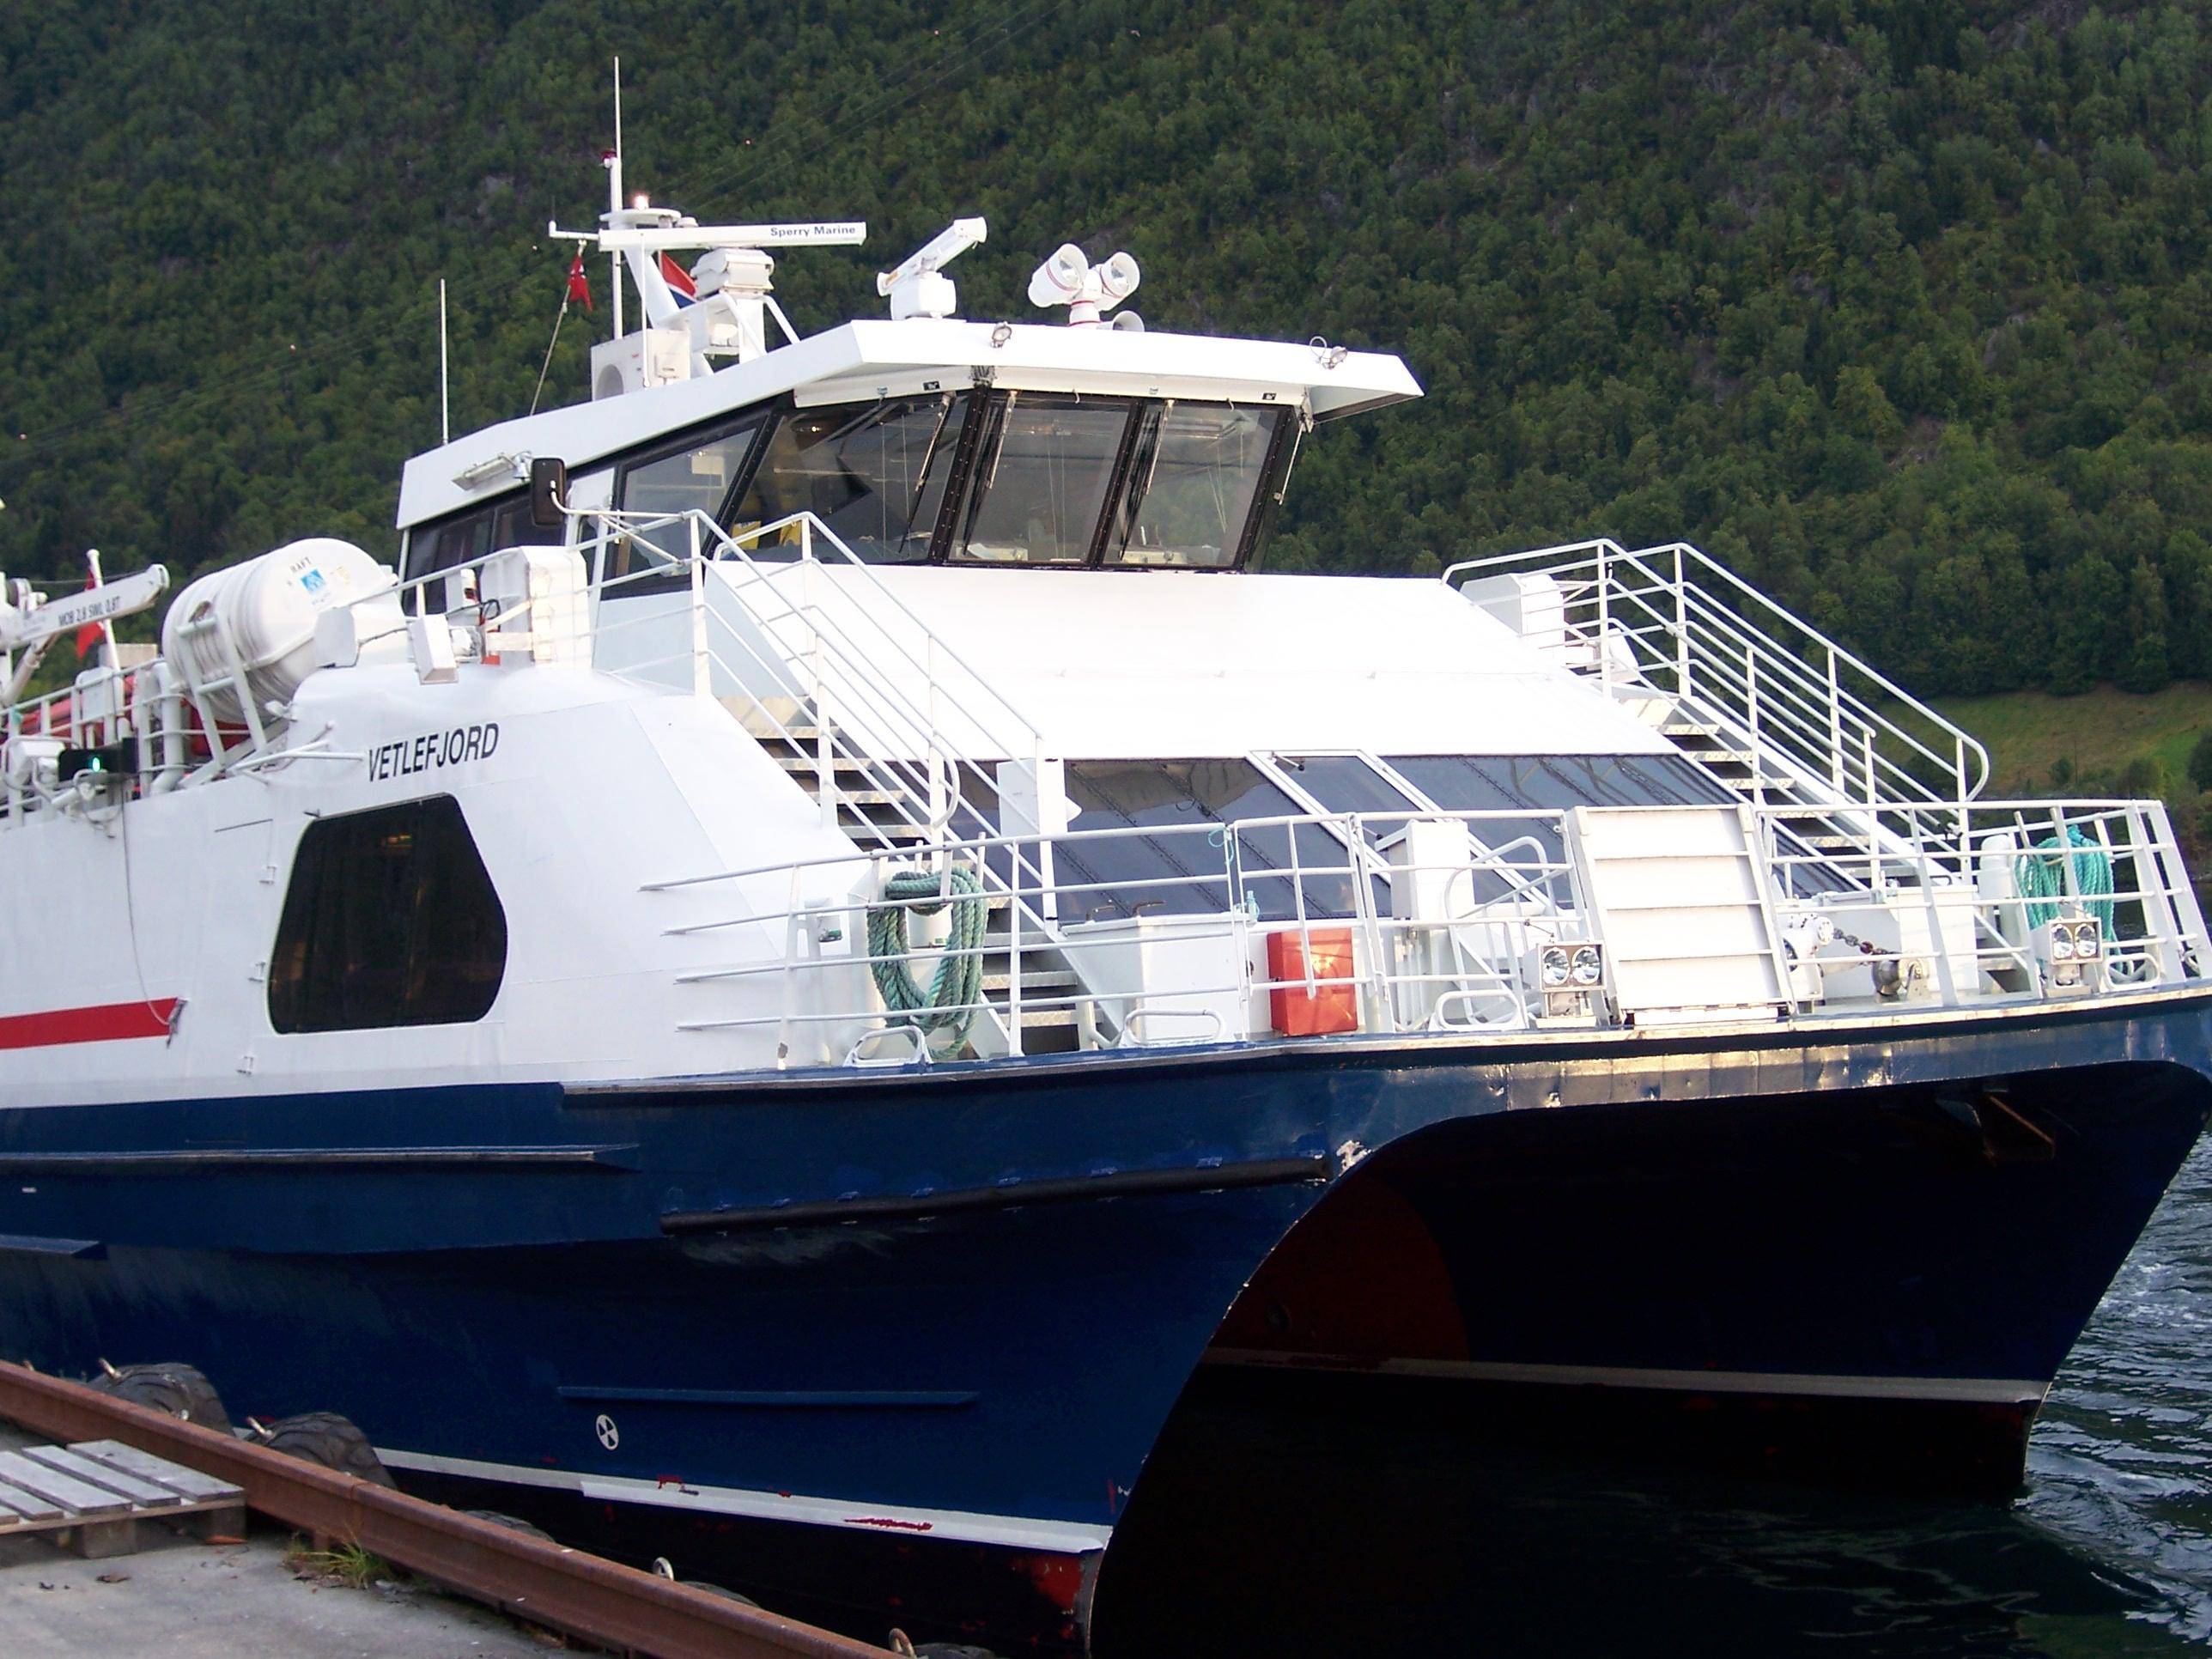 Boat to Jostedalsbreen